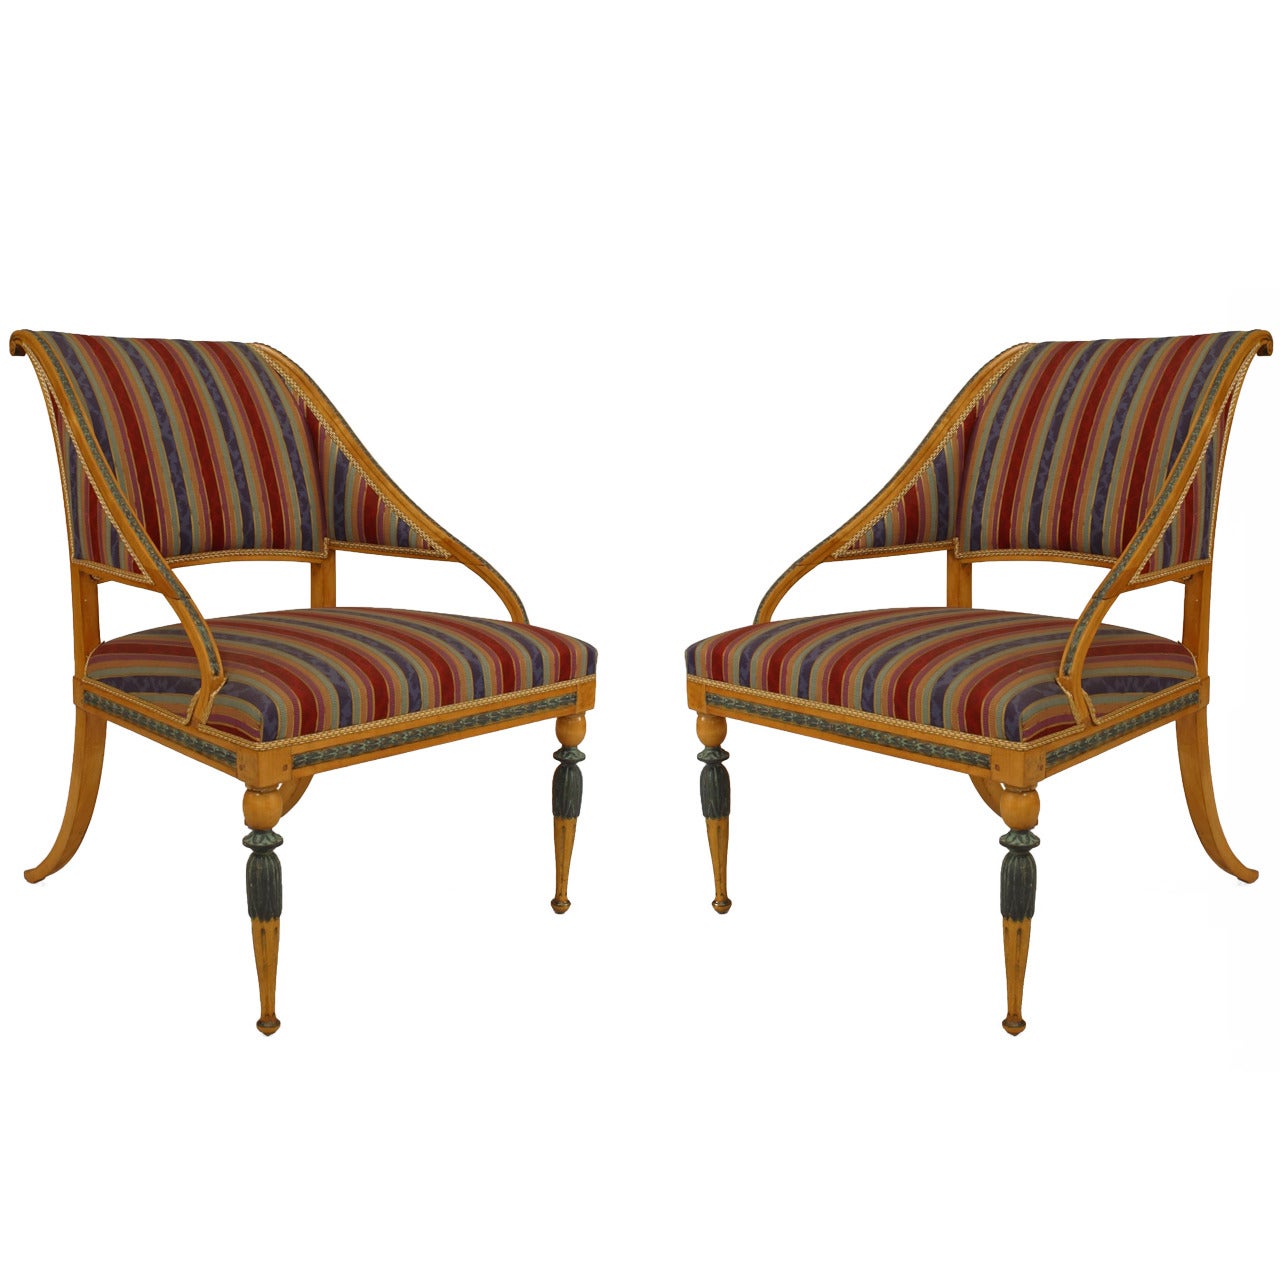 Pair of Swedish Neoclassic Striped Armchairs For Sale